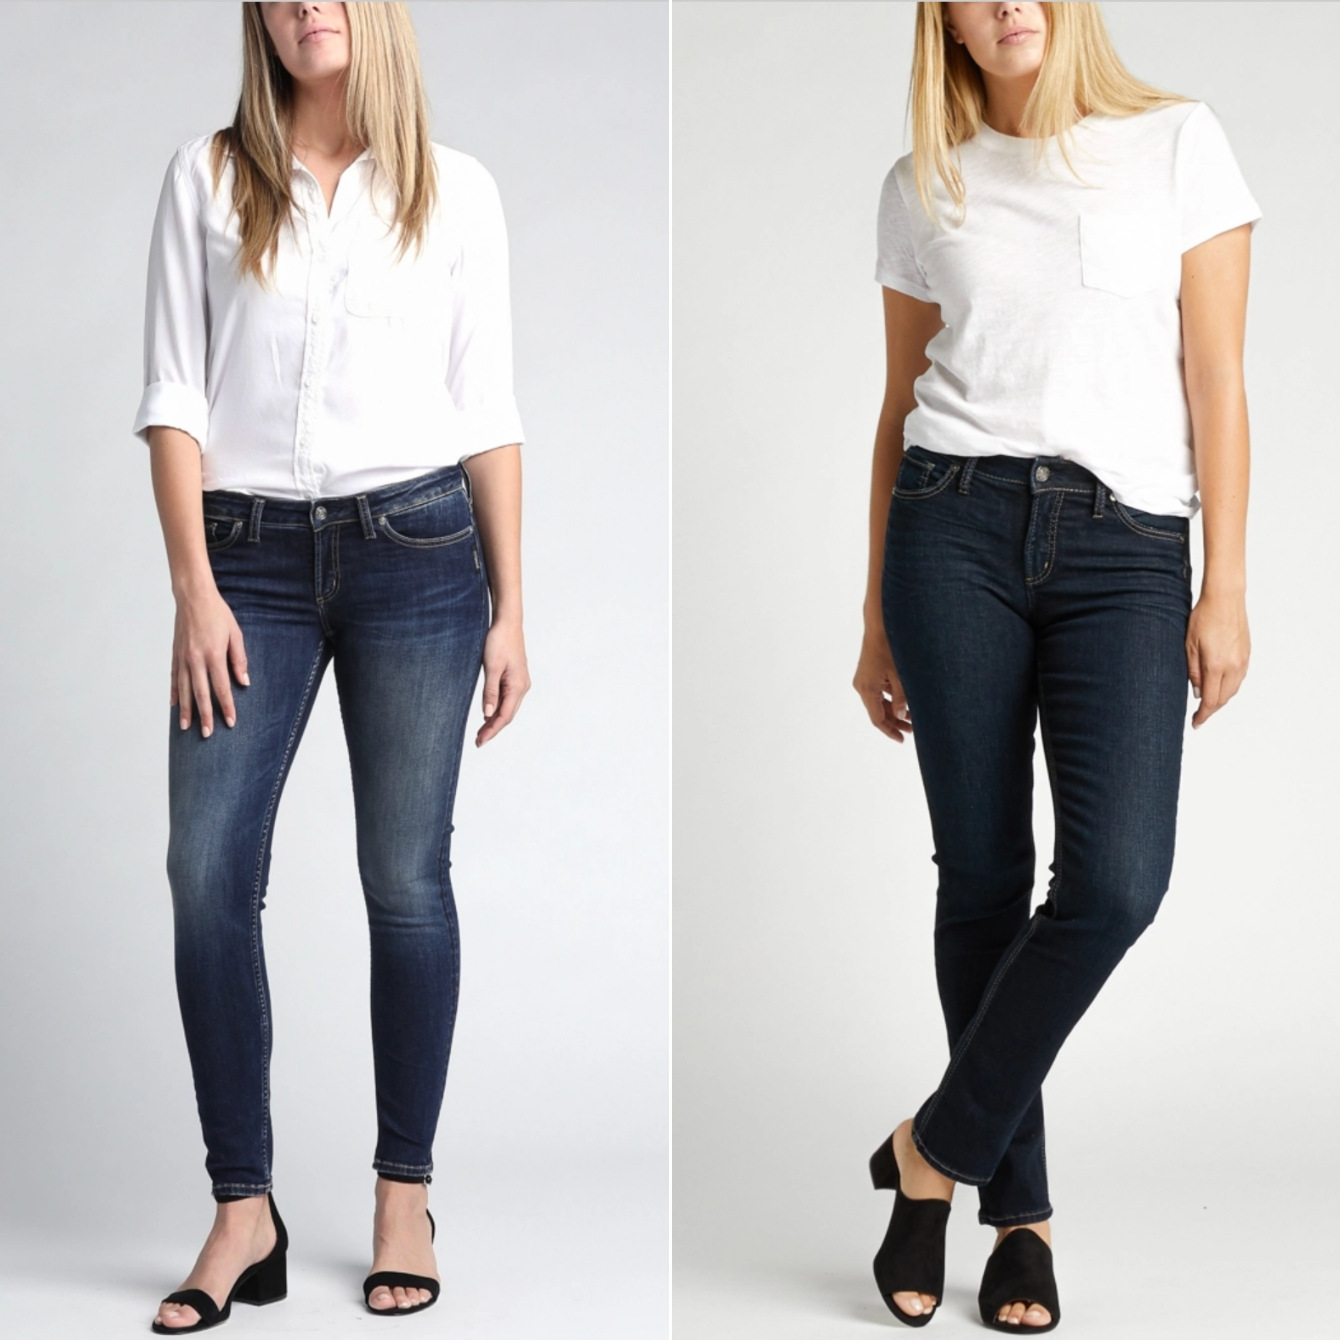 Low rise vs. high rise jeans